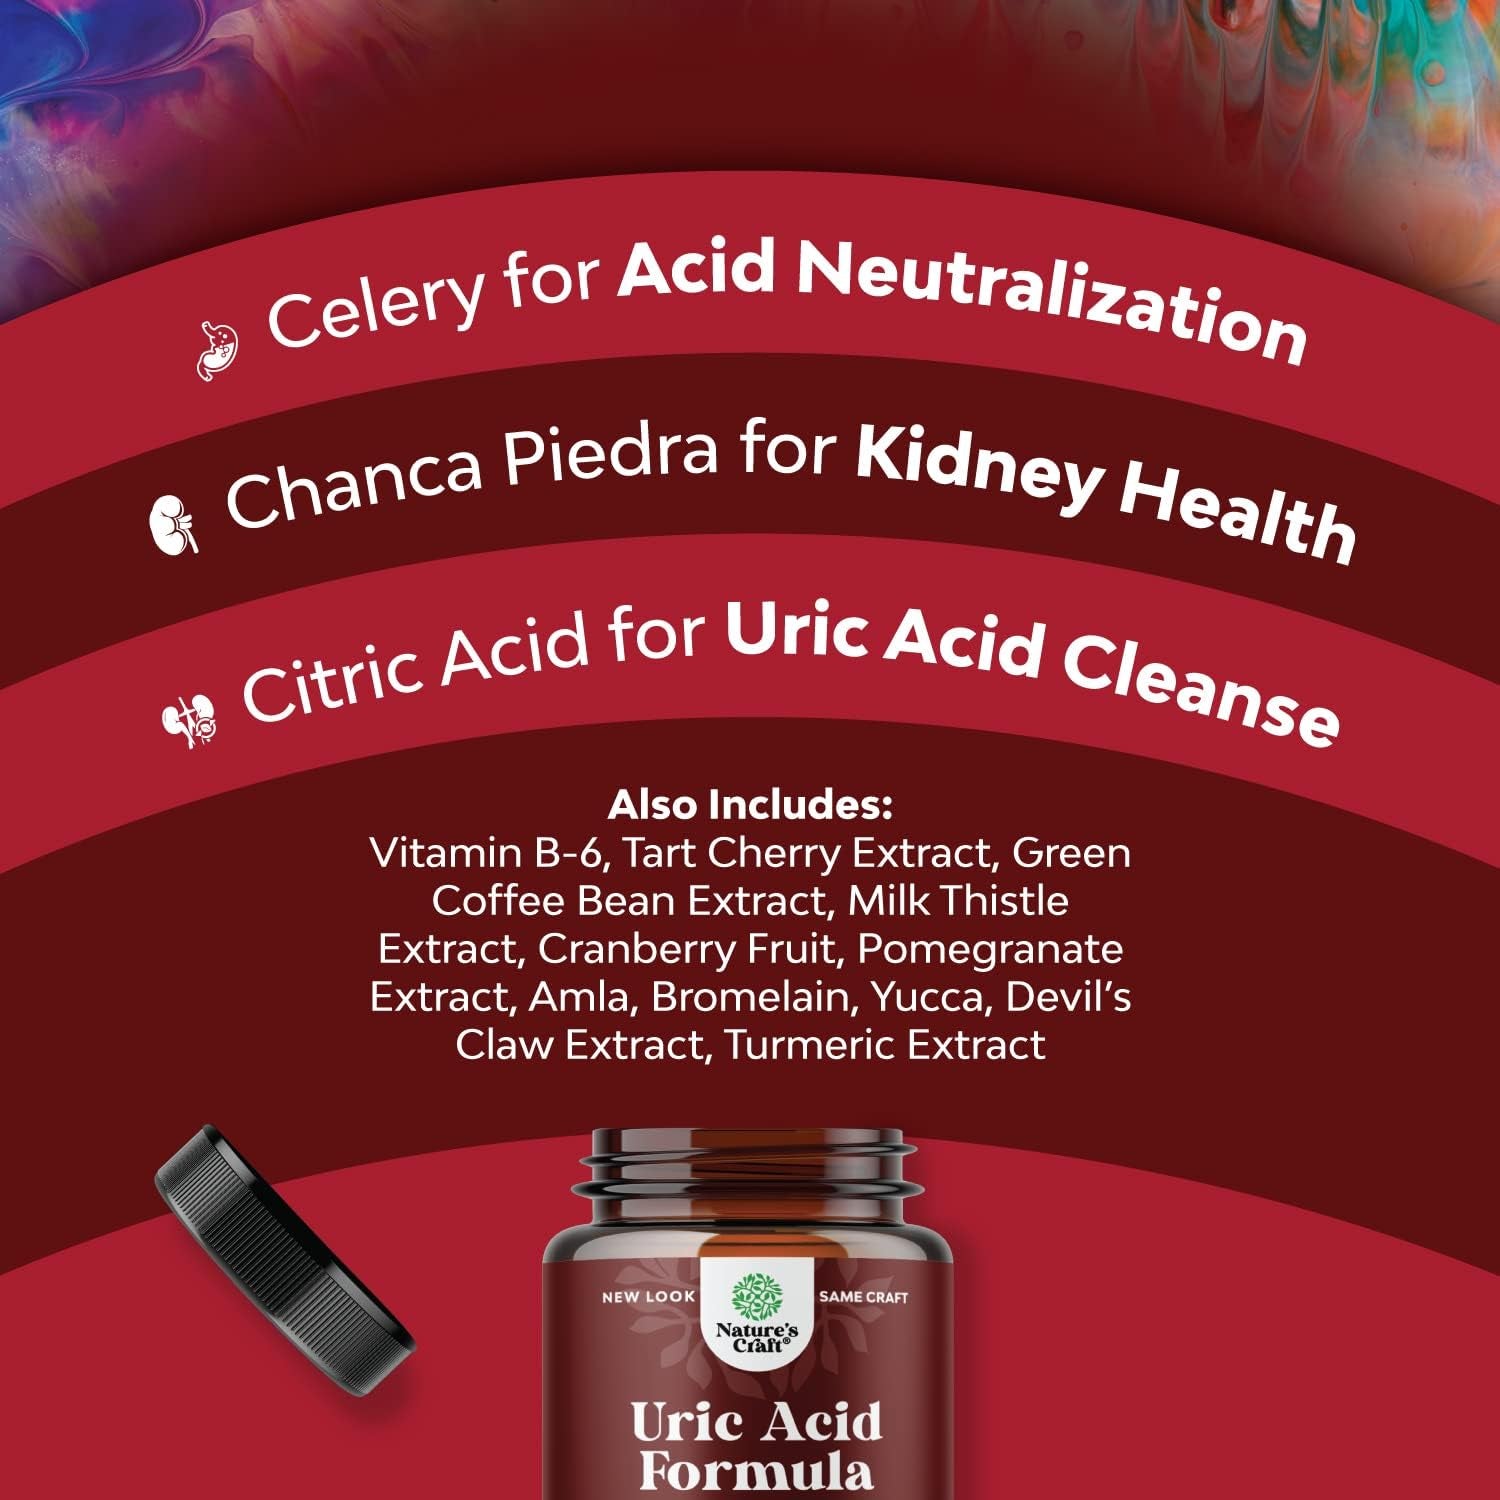 Herbal Uric Acid Cleanse and Detox - Essential Daily Kidney Cleanse and Uric Acid Support for Adults – Joint Support Supplement and Detox Cleanse with Tart Cherry Extract Capsules for Men and Women